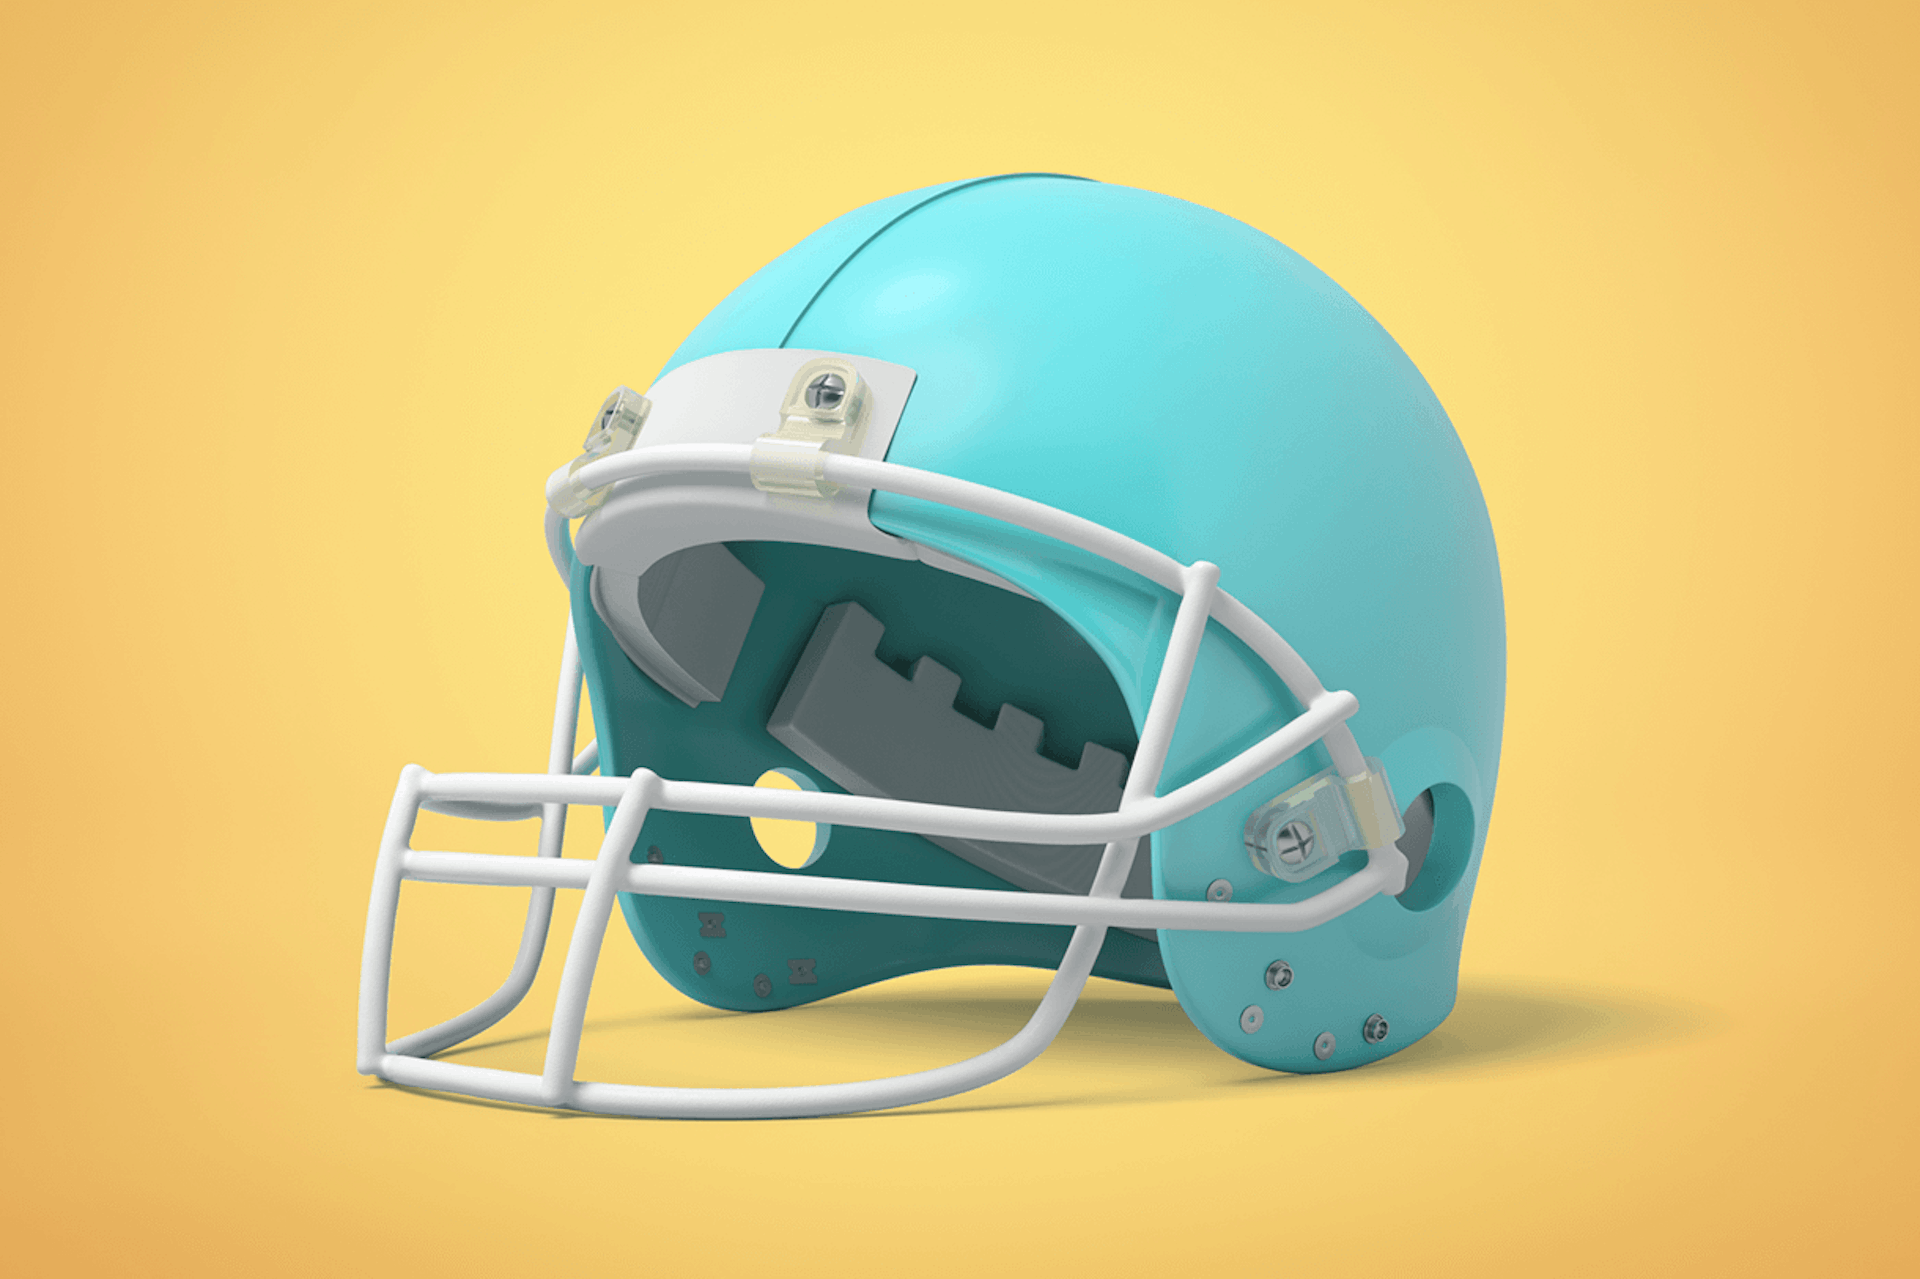 A blue football helmet against a yellow background for a blog about ads during football's big night